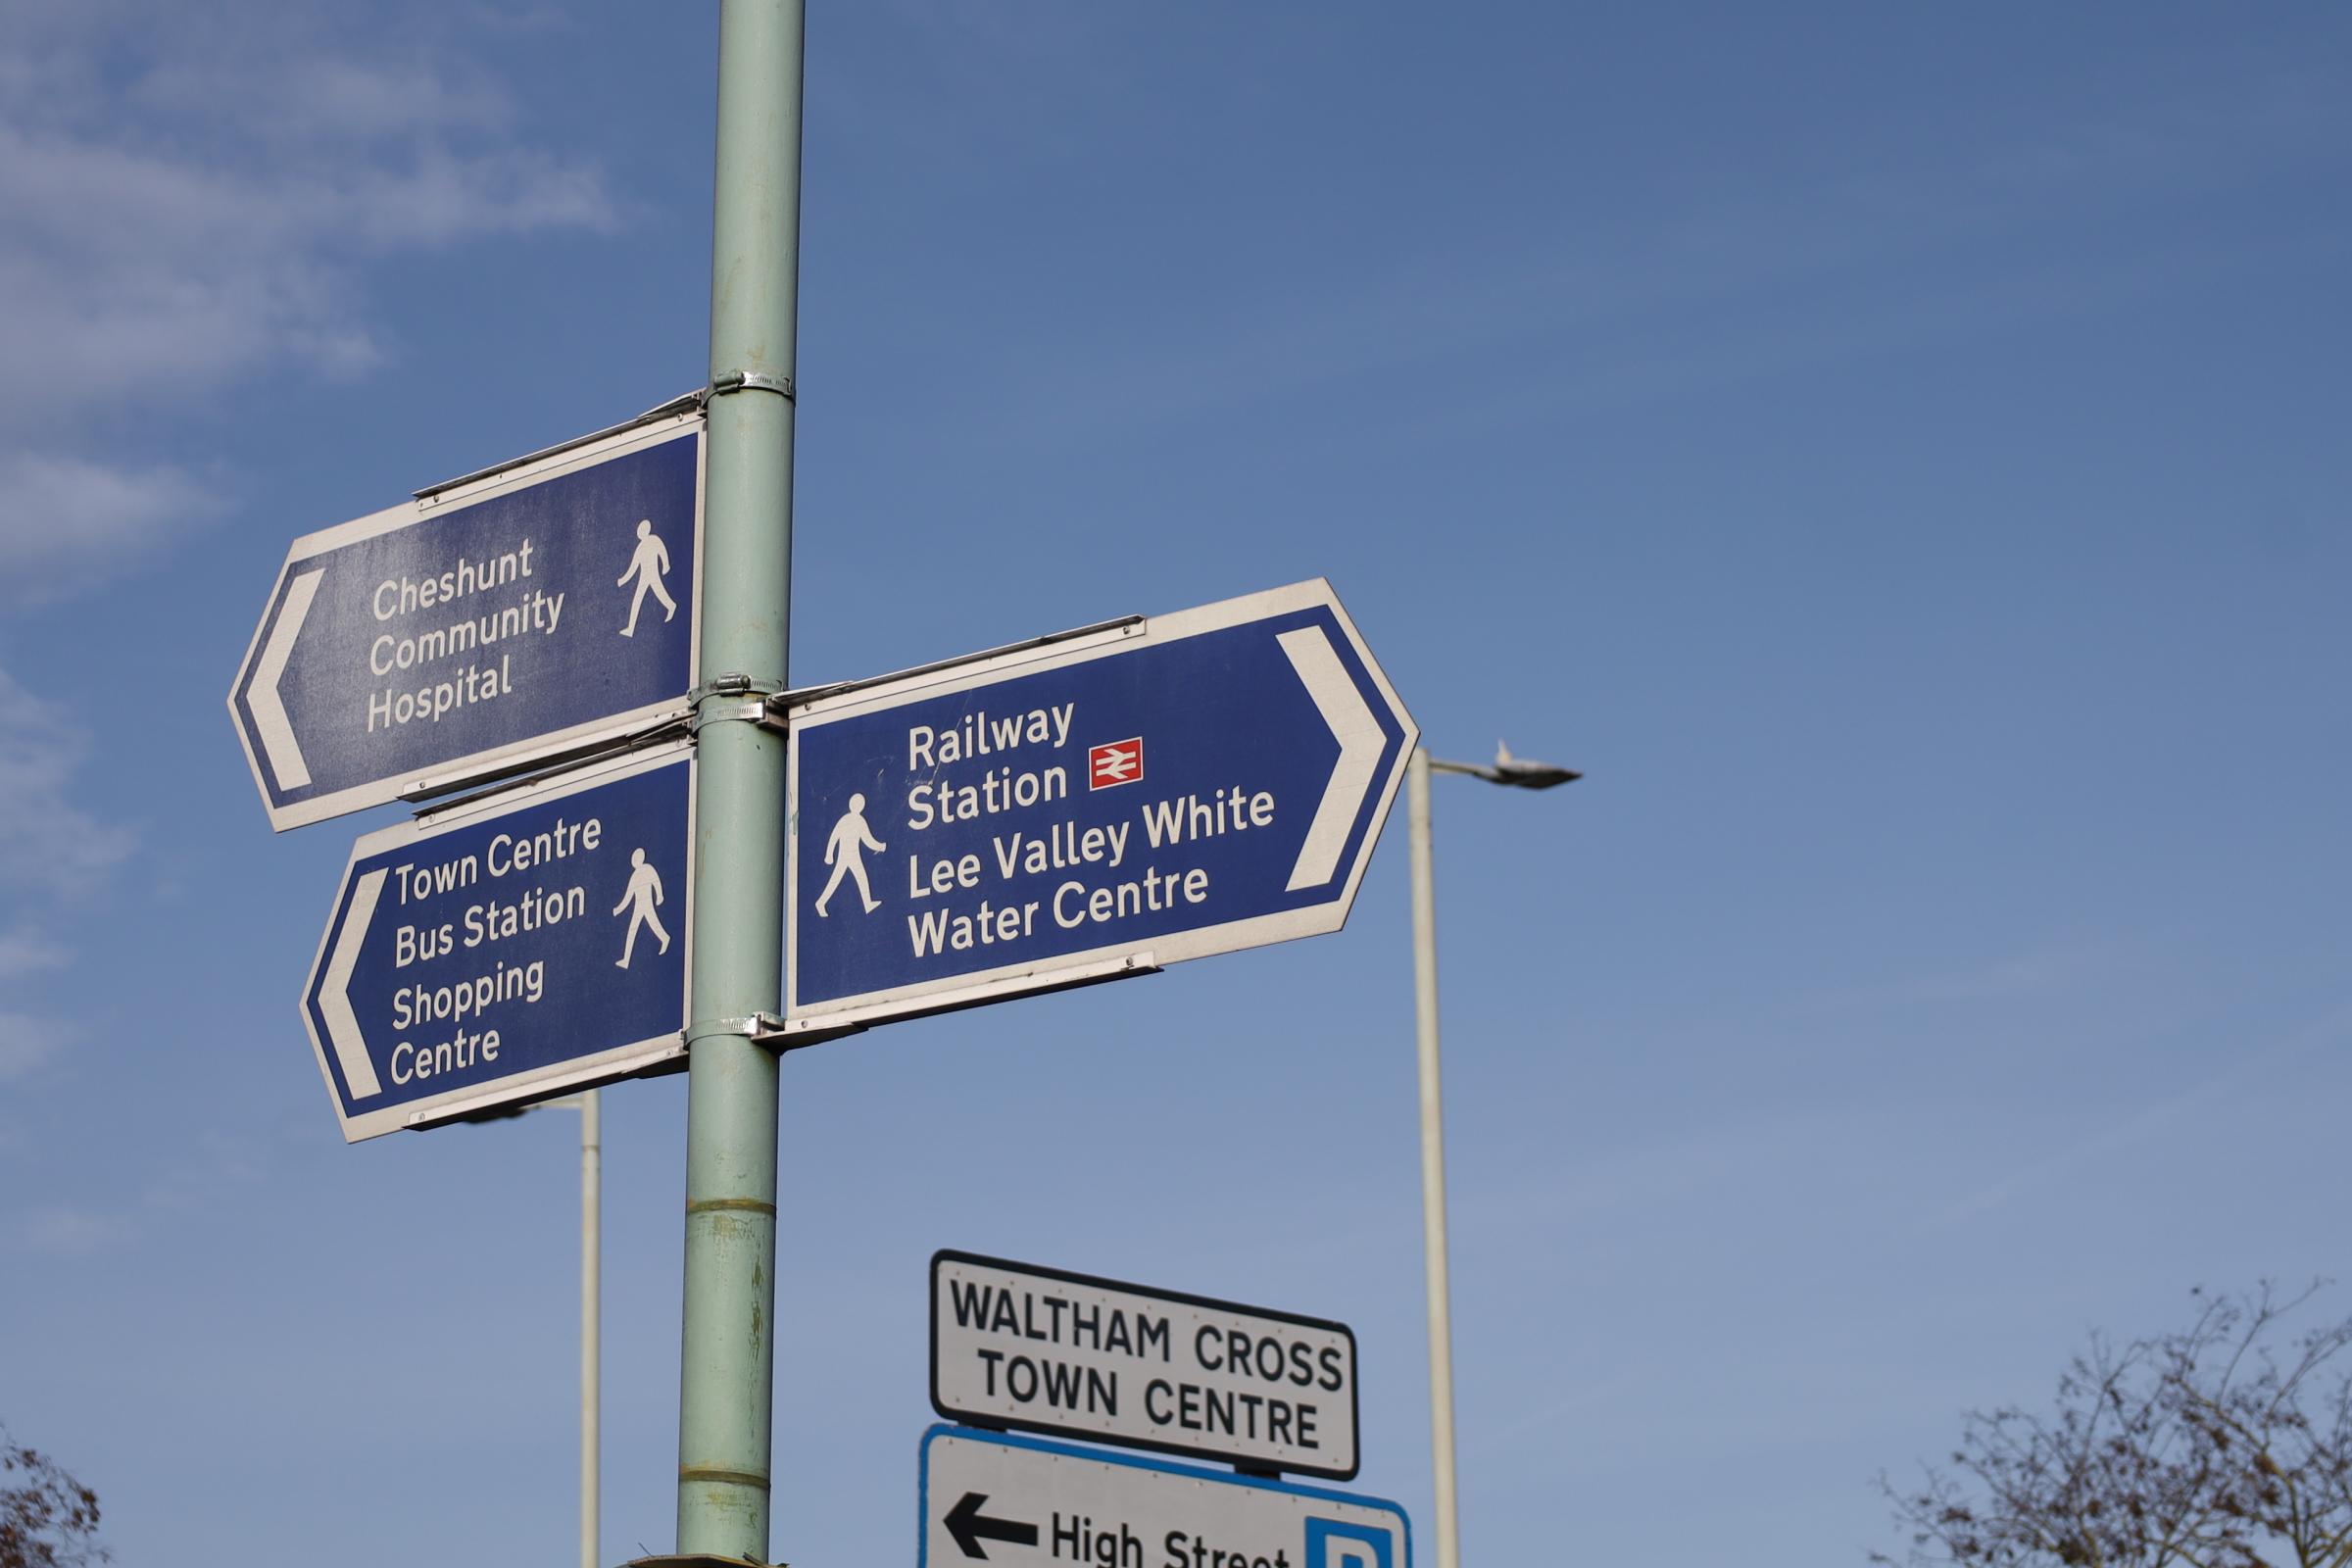 Signs for the Lee Valley White Water Centre and Cheshunt Community Hospital in Waltham Cross, Hertfordshire.